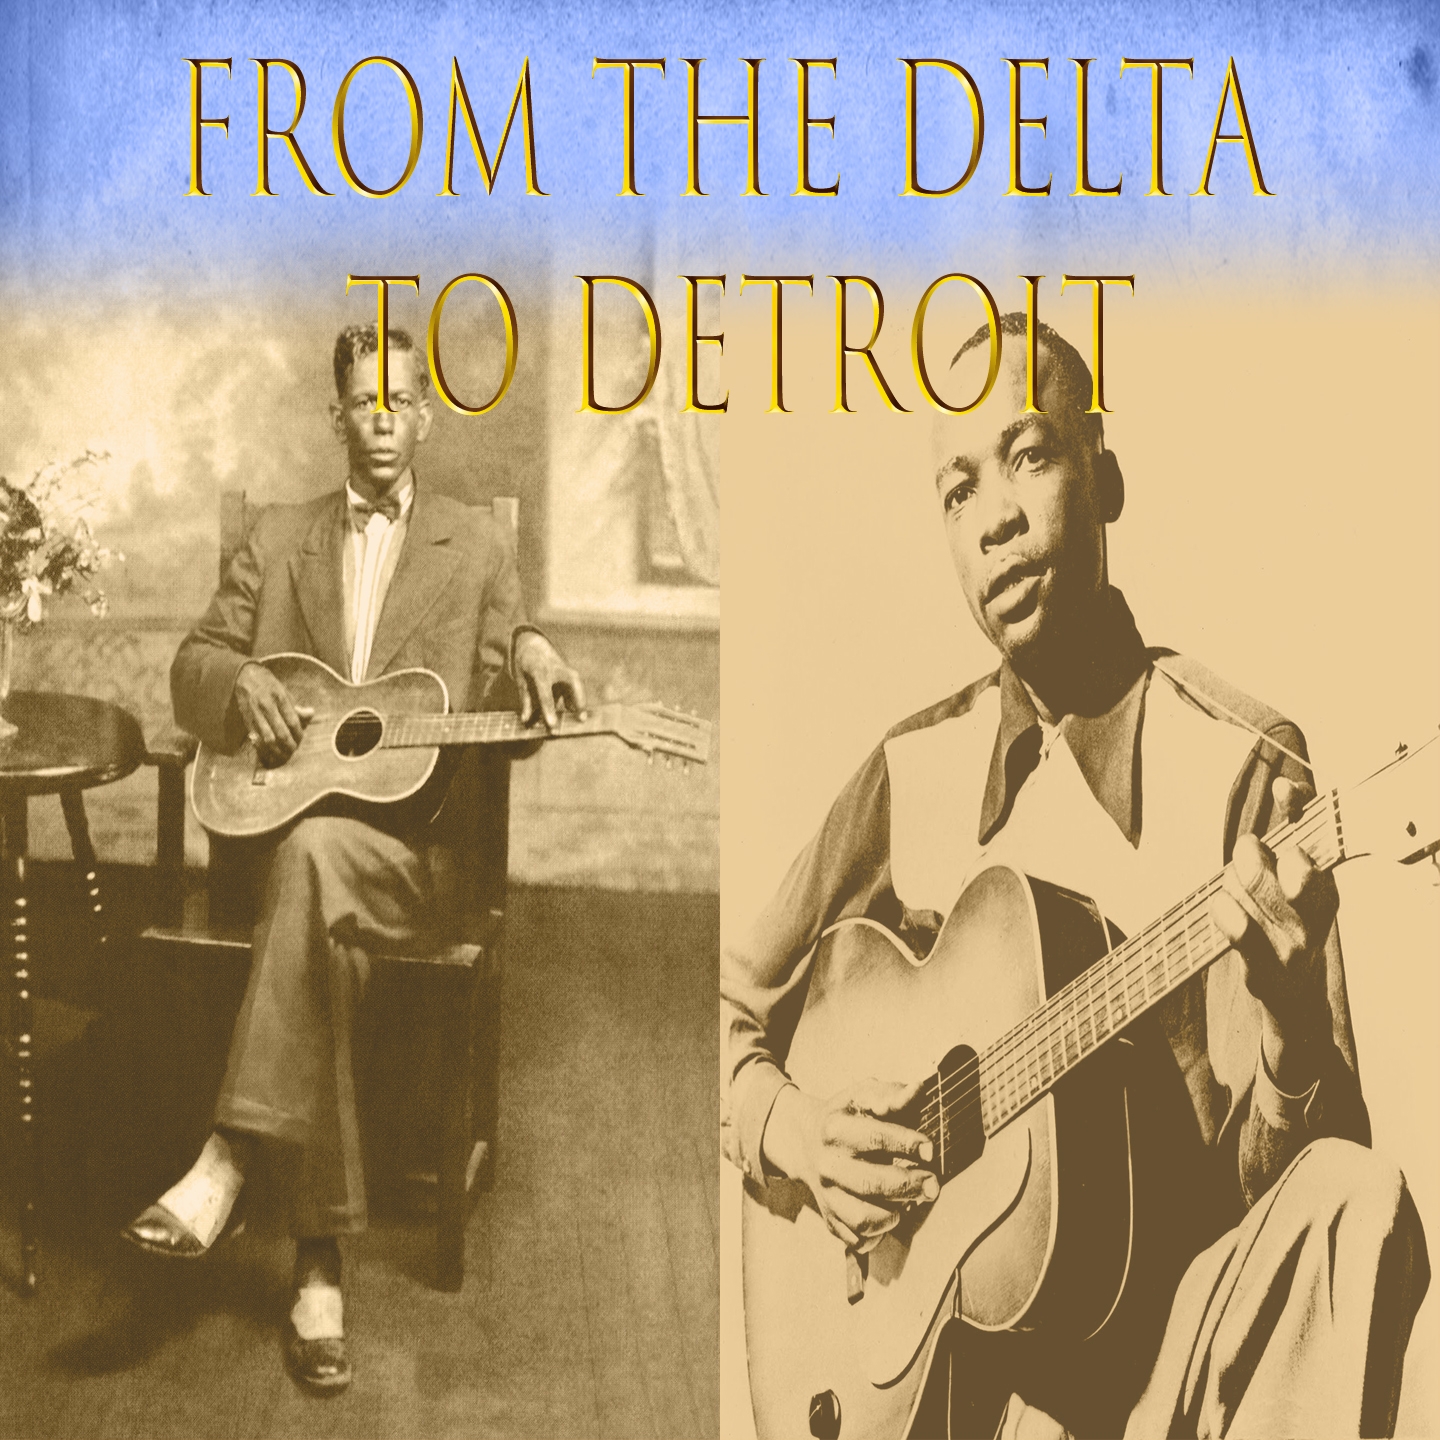 From The Delta To Detroit